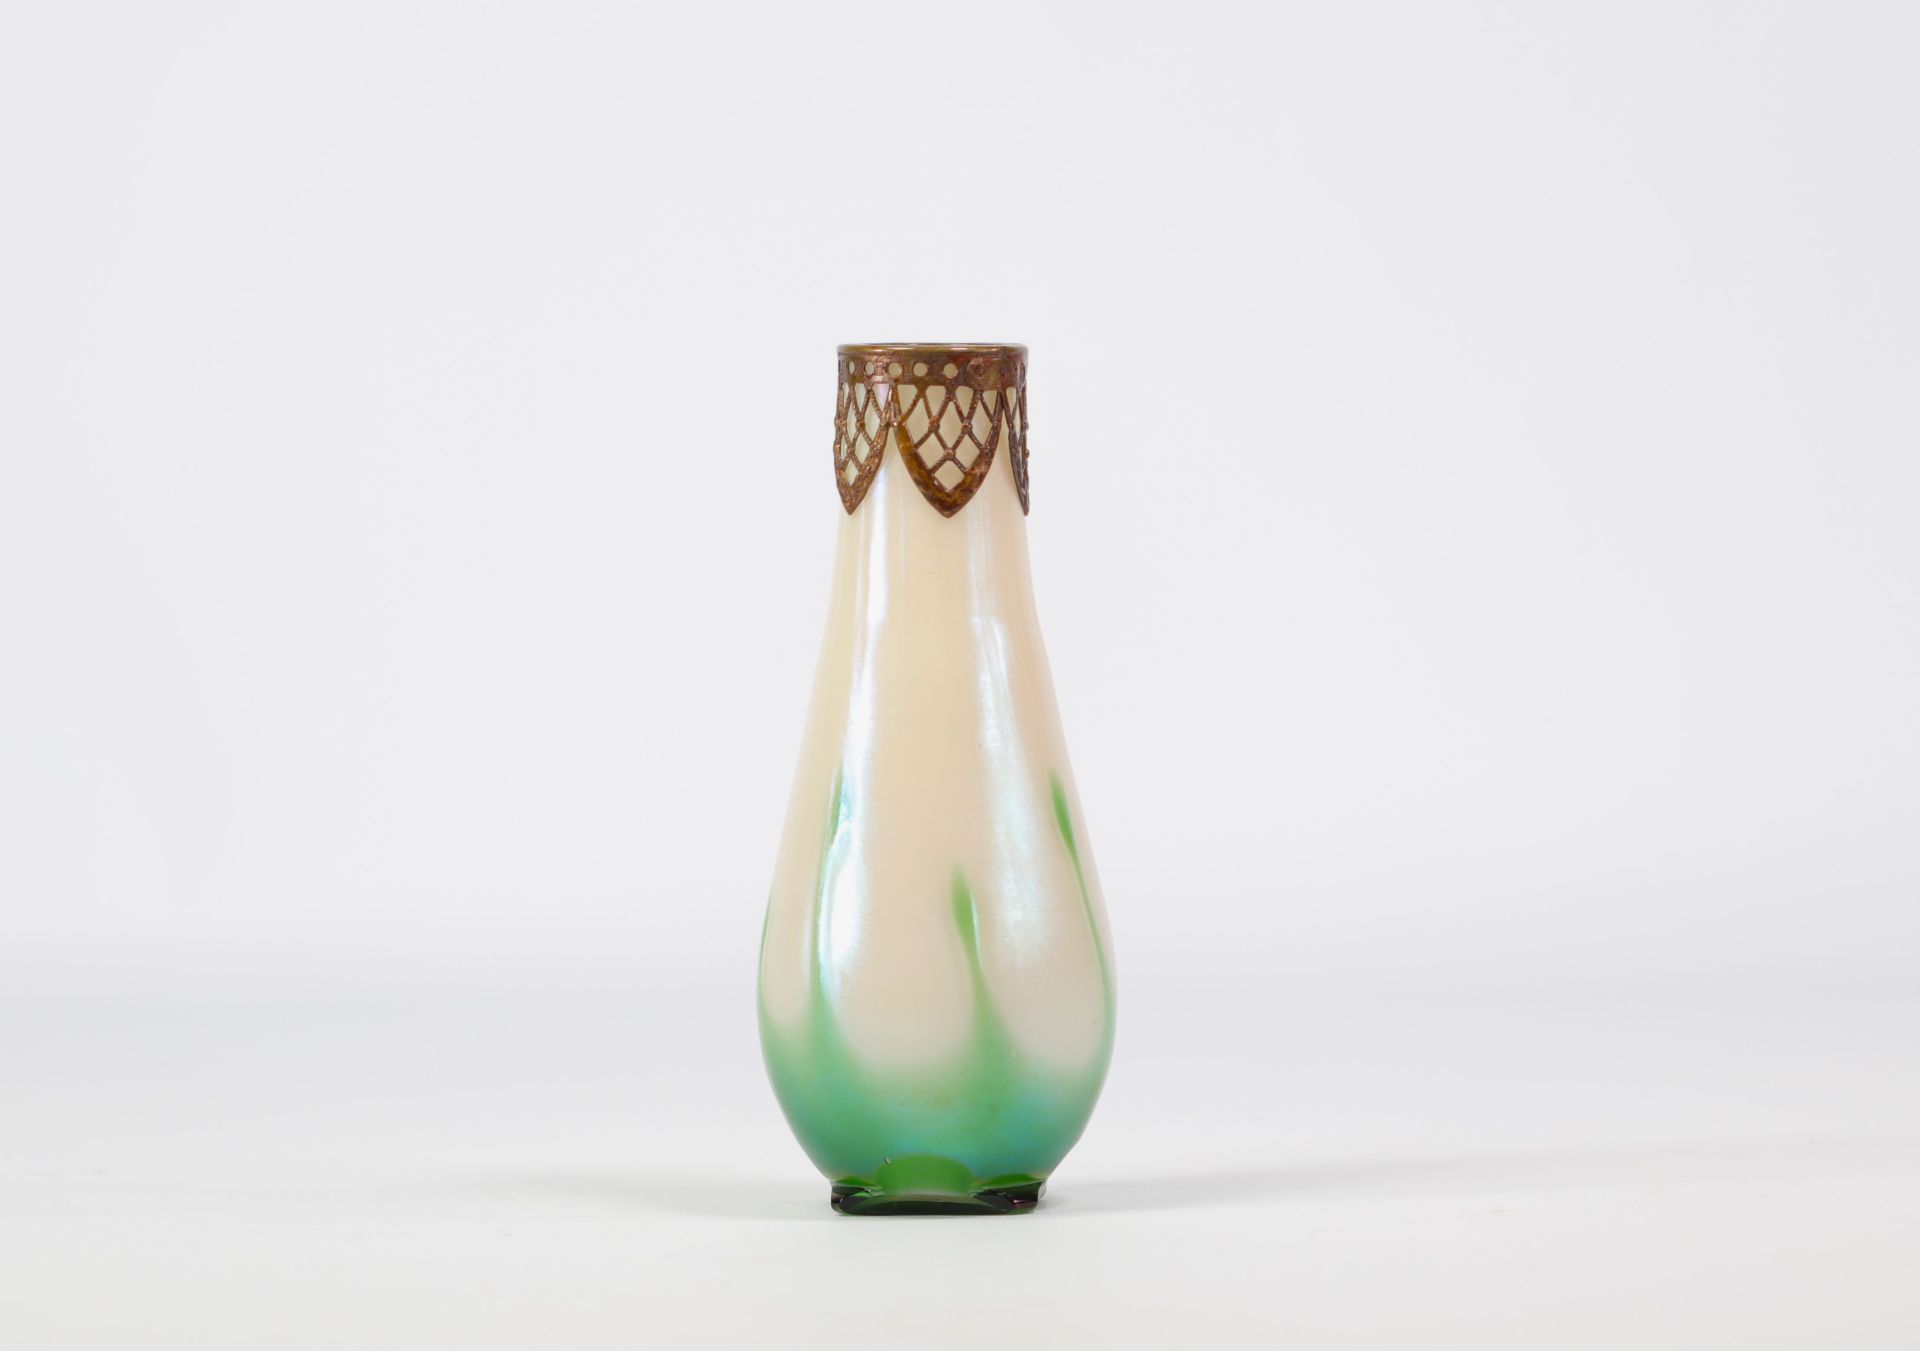 Iridescent 1900 vase with Art Nouveau mounting on neck